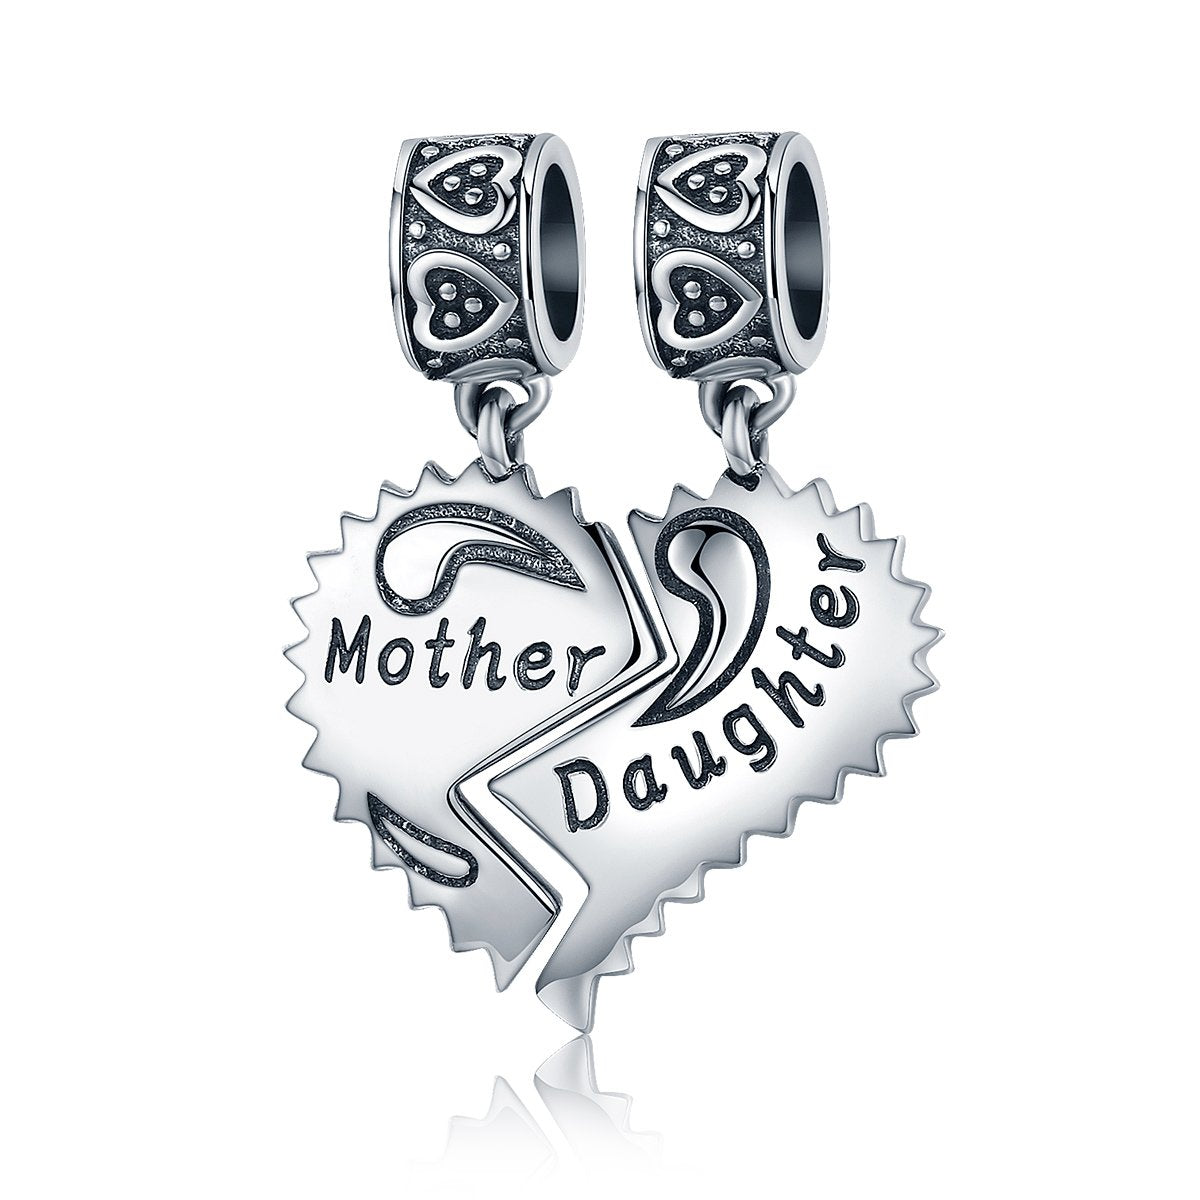 Sterling 925 silver charm the mother and daughter bead pendant fits Pandora charm and European charm bracelet Xaxe.com